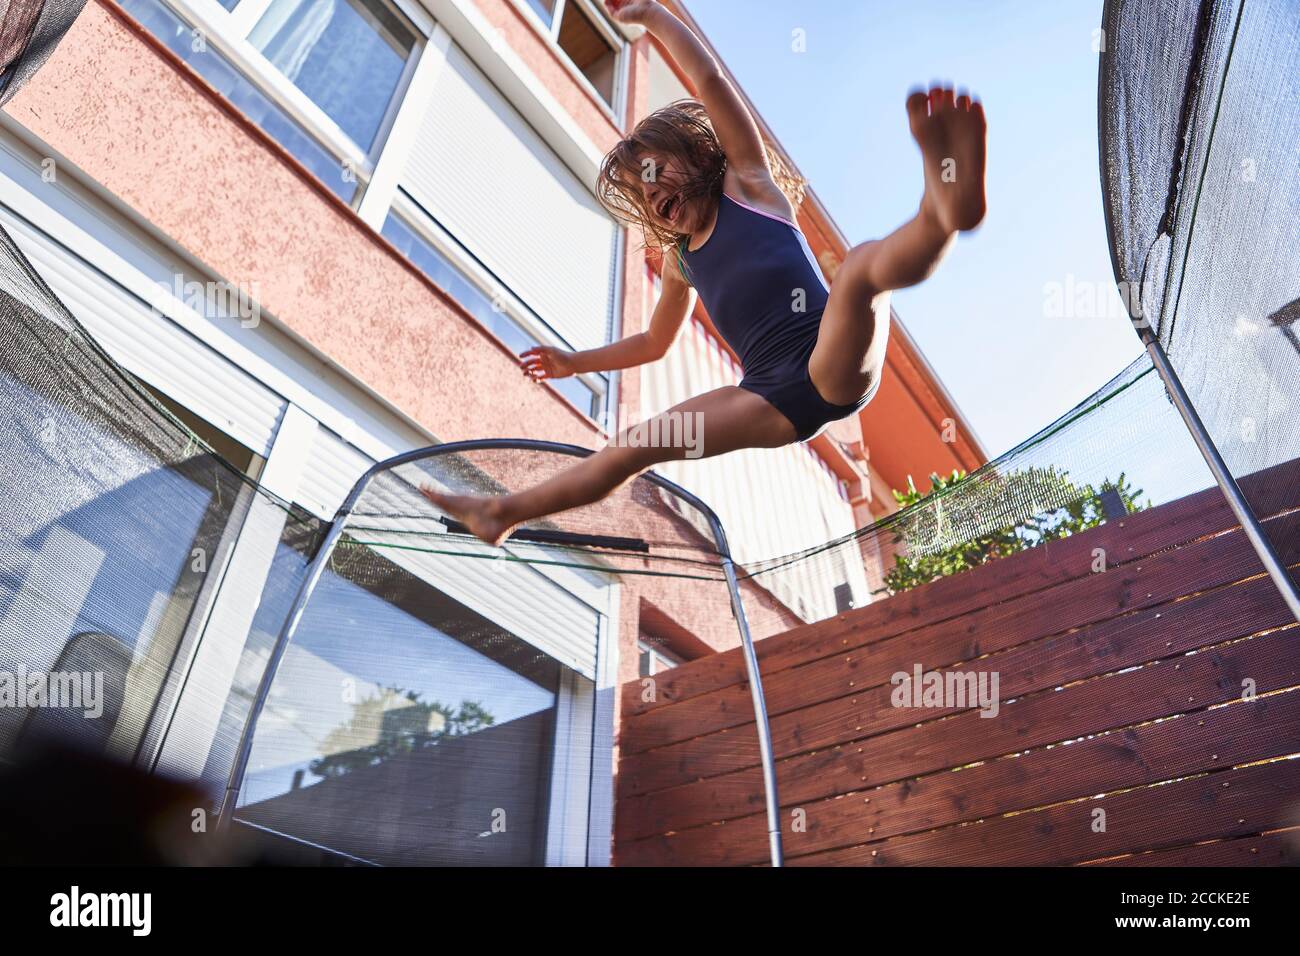 Cheerful girl jumping on trampoline against house during sunny day Stock Photo